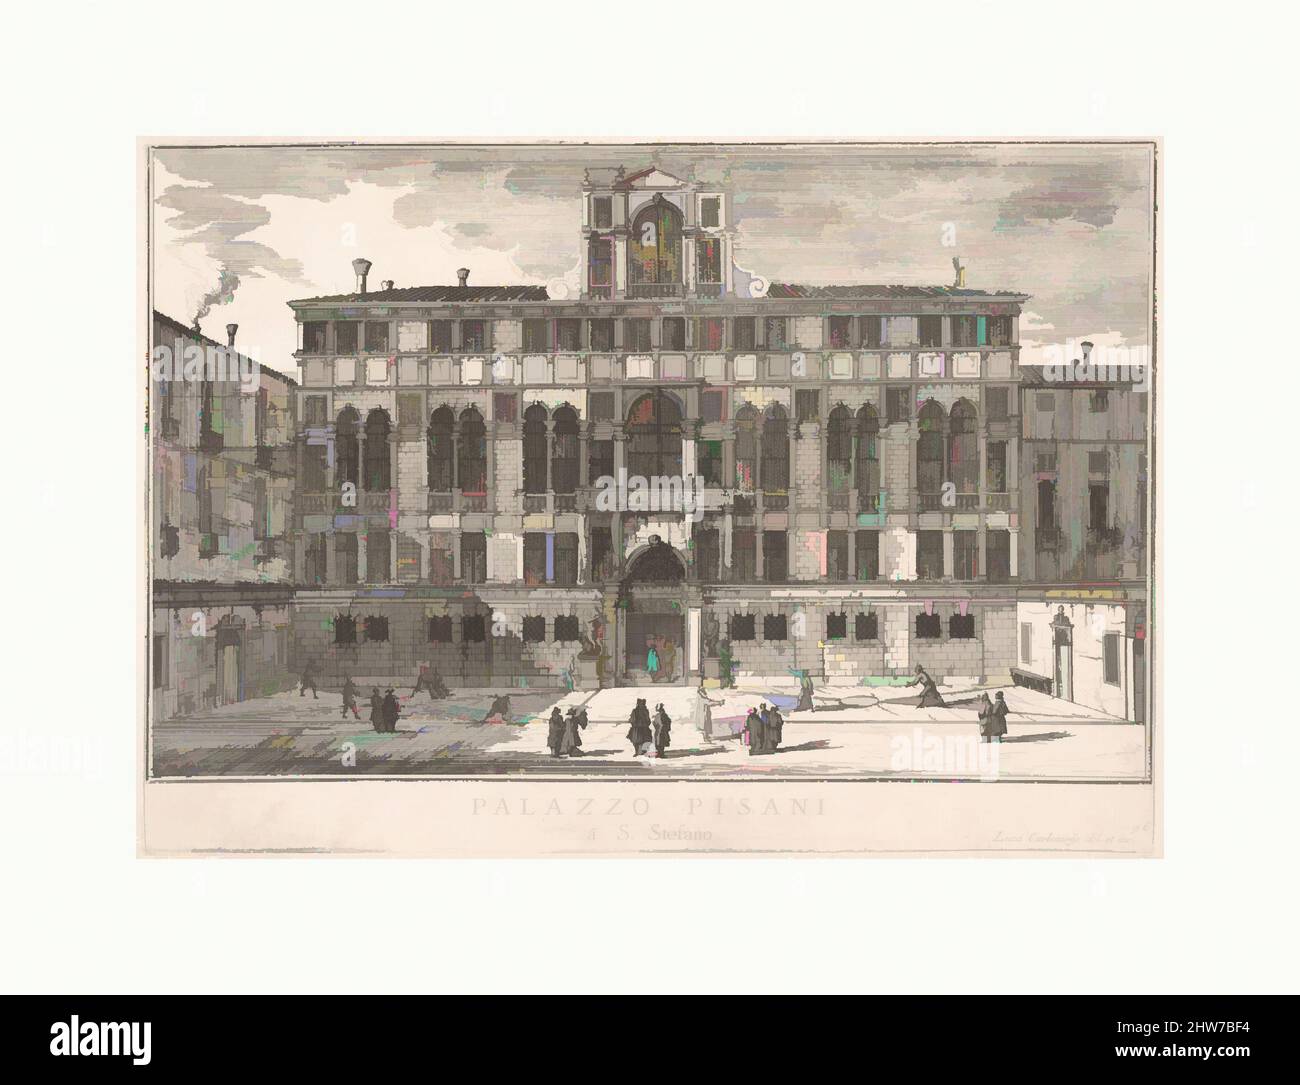 Art inspired by Plate 96: View of the facade of the Pisani Palace in Campo Santo Stefano, Venice, 1703, from the series 'The buildings and views of Venice' (Le fabriche e vedute di Venezia), 1703, Etching, plate: 8 3/16 x 11 5/8 in. (20.8 x 29.5 cm), Luca Carlevaris (Italian, Udine, Classic works modernized by Artotop with a splash of modernity. Shapes, color and value, eye-catching visual impact on art. Emotions through freedom of artworks in a contemporary way. A timeless message pursuing a wildly creative new direction. Artists turning to the digital medium and creating the Artotop NFT Stock Photo